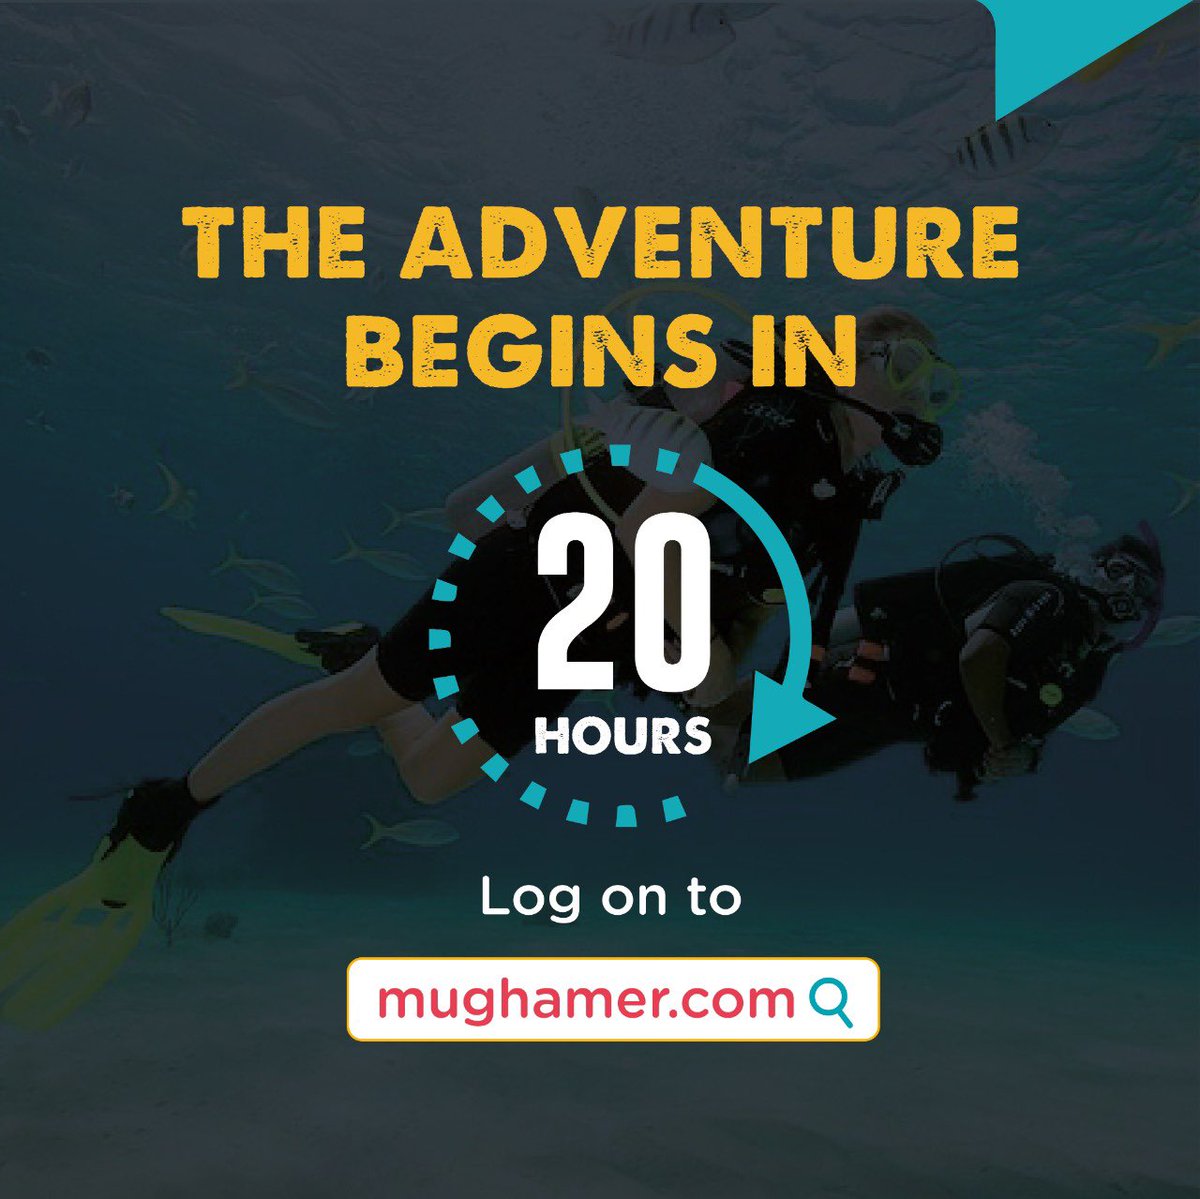 20 hours to go until the adventure of your dreams! Stay tuned for more updates. 
. 
. 
. 
#mughamerdotcom #limitlessadventures